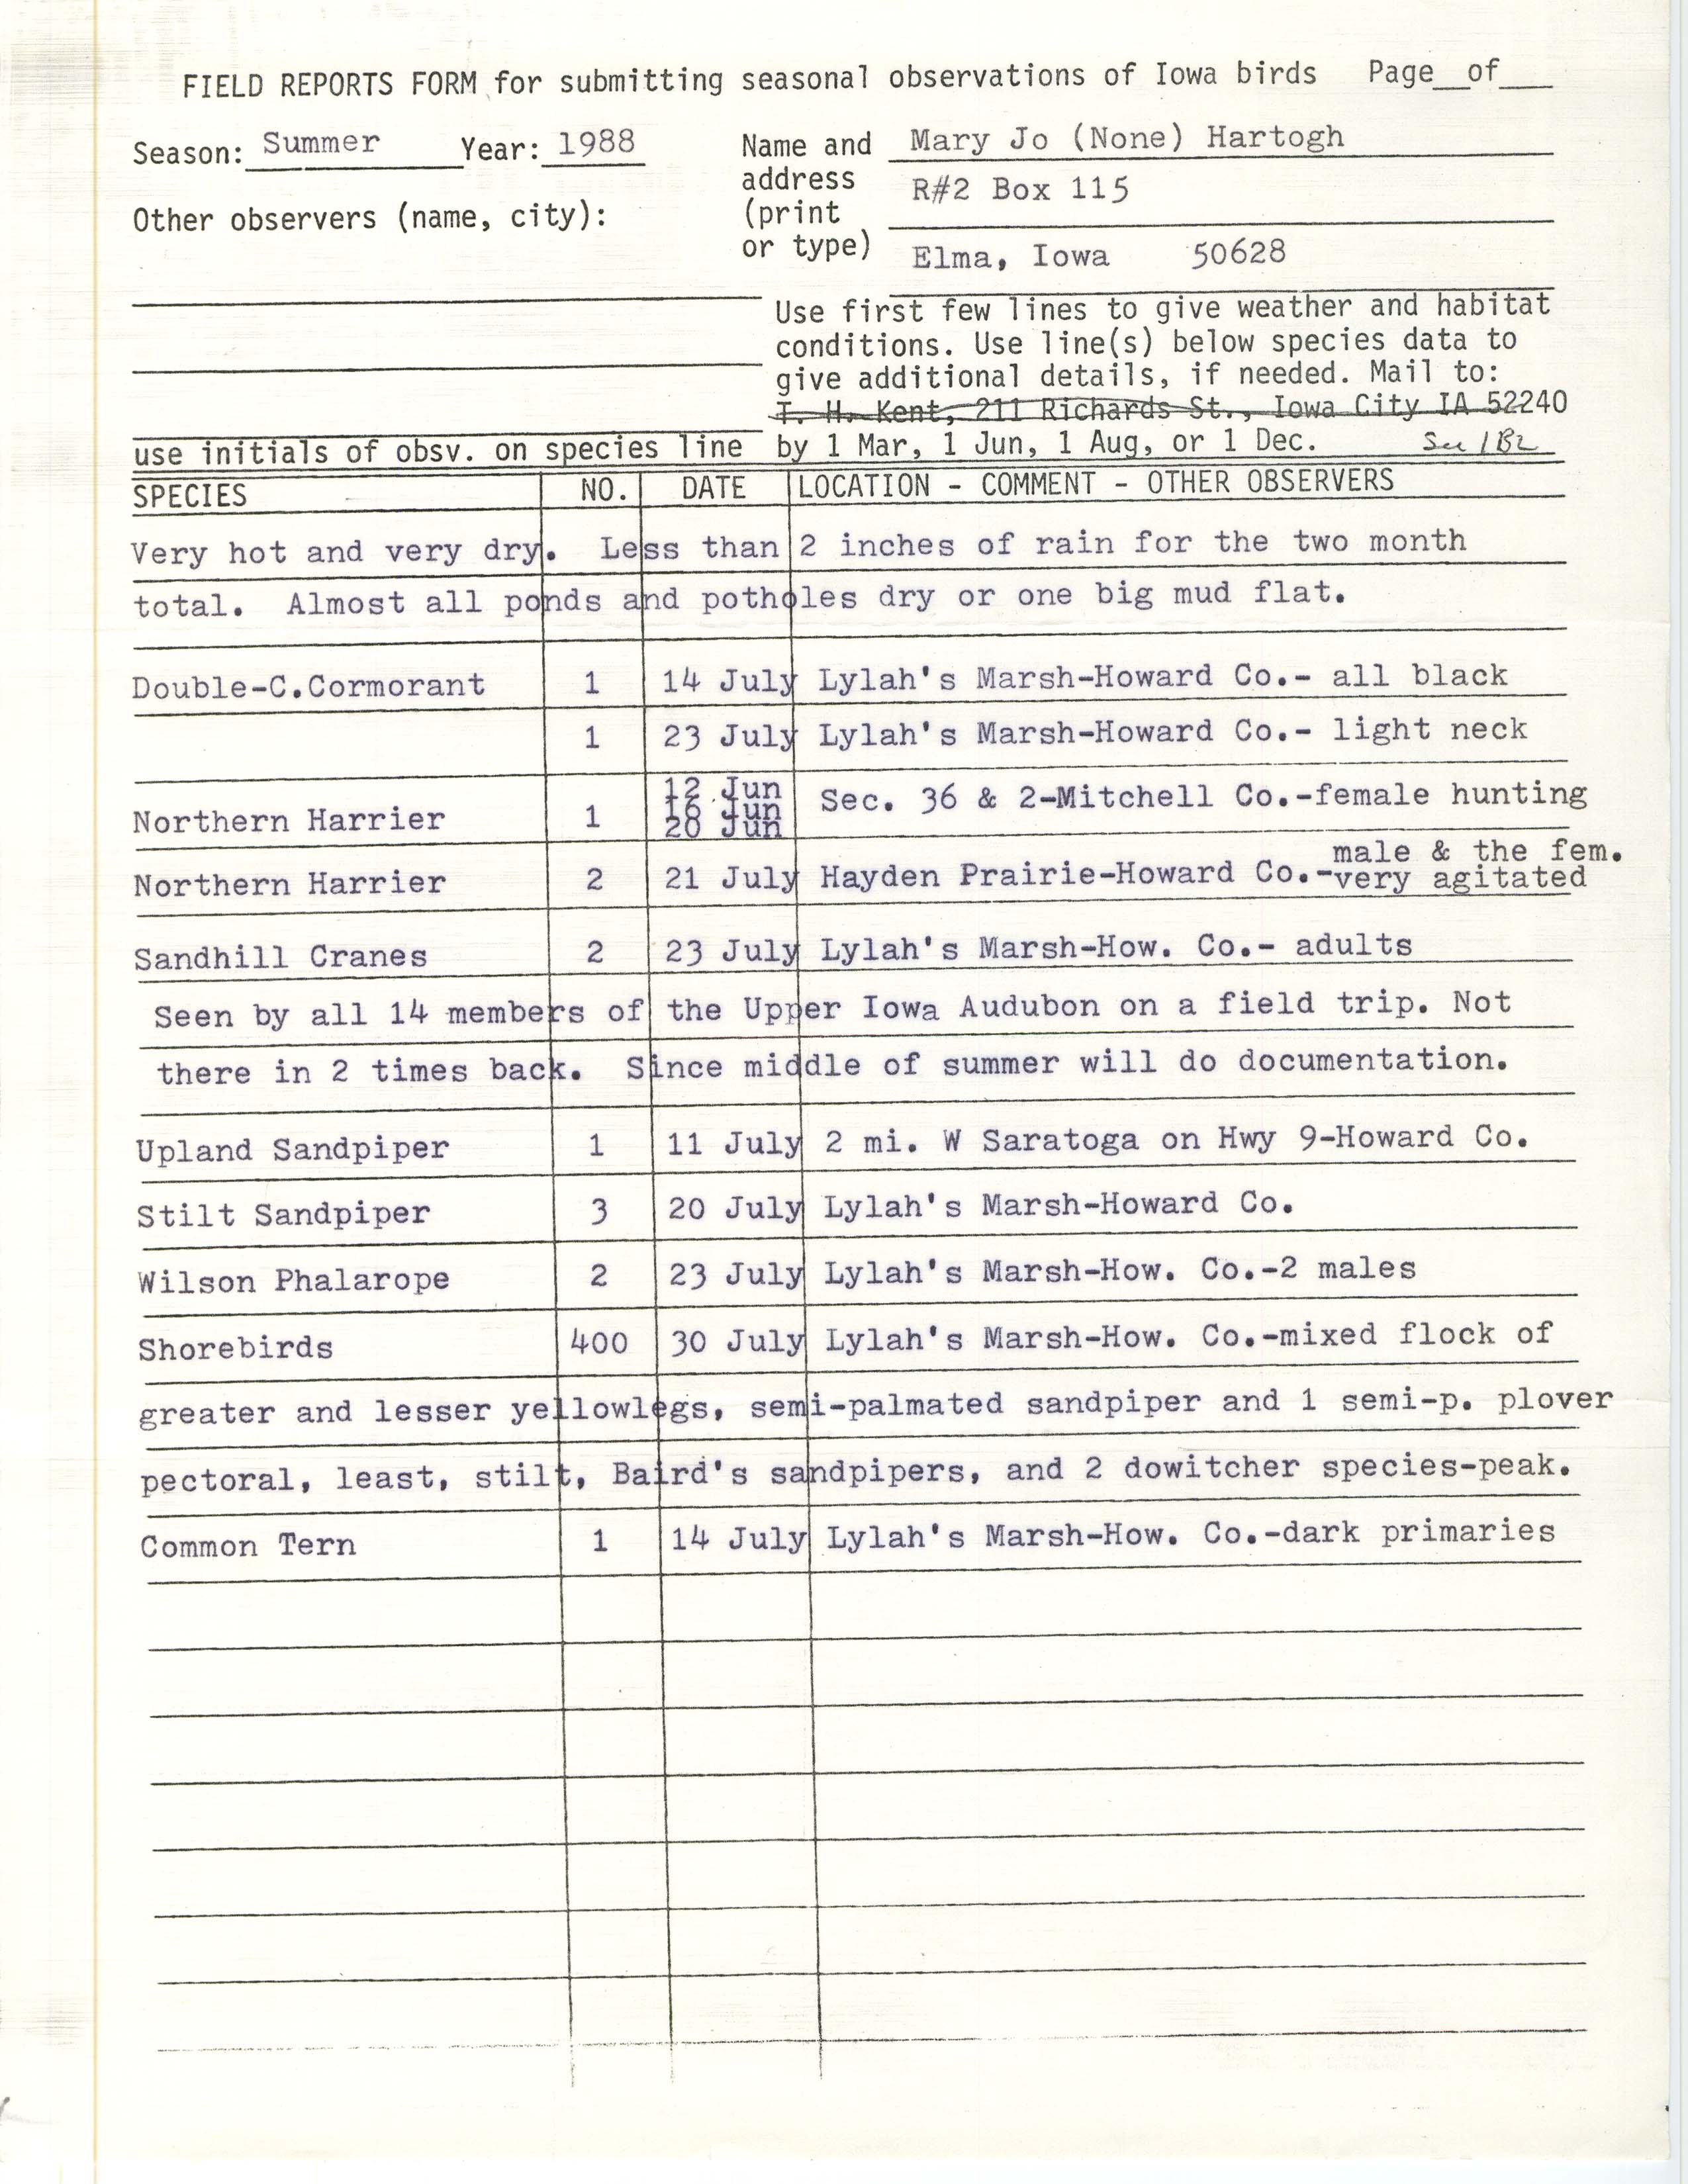 Field reports form for submitting seasonal observations of Iowa birds, Mary Jo Hartogh, summer 1988